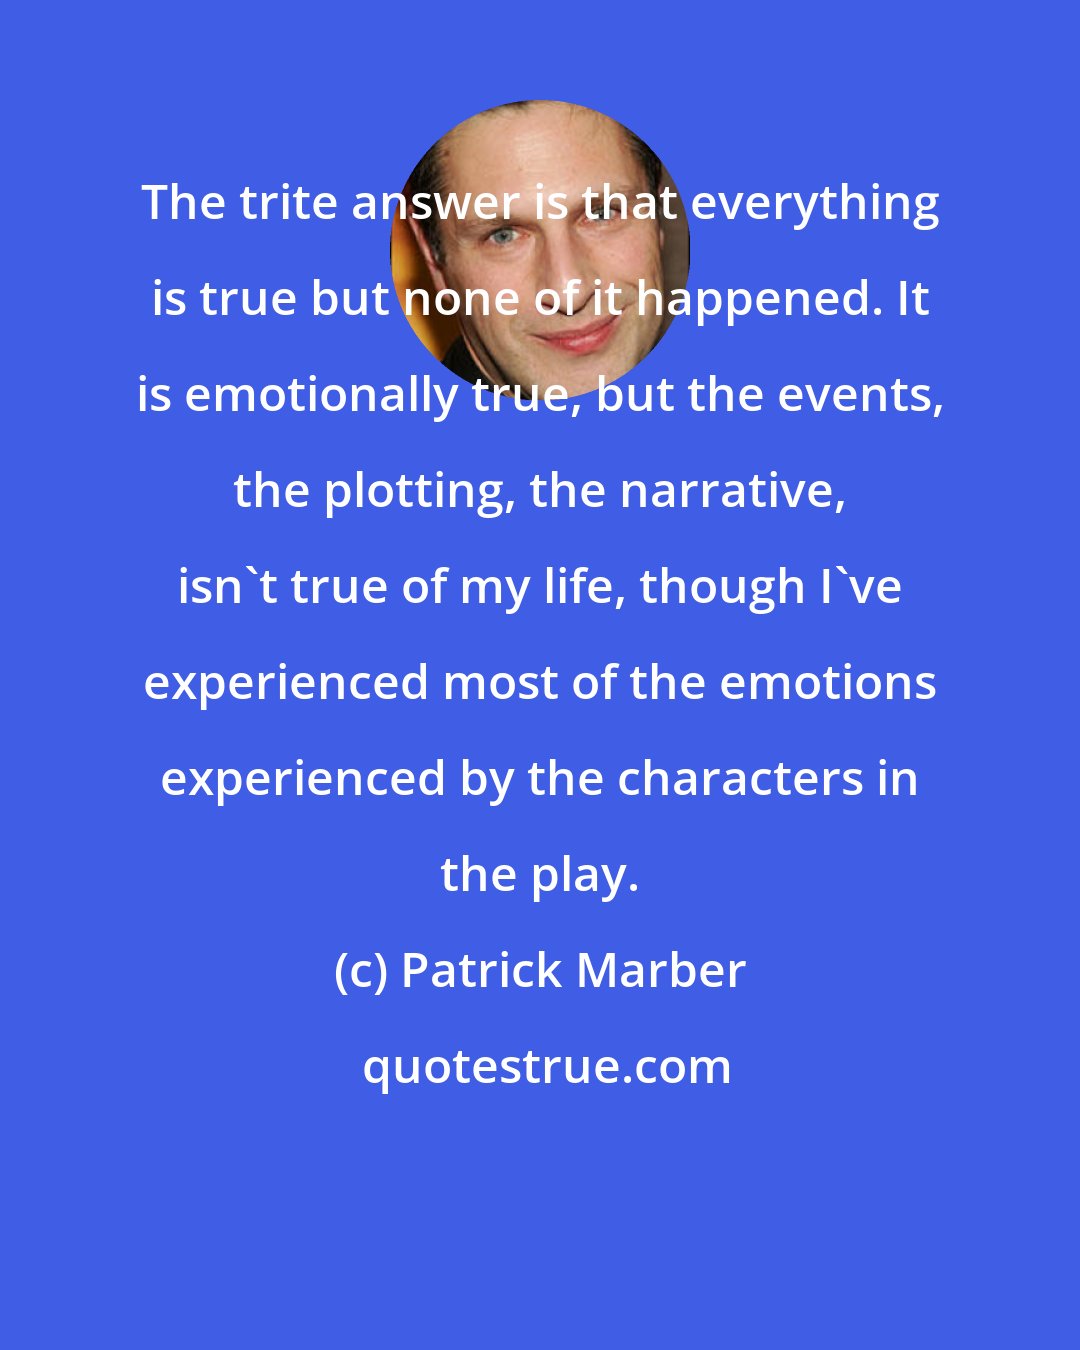 Patrick Marber: The trite answer is that everything is true but none of it happened. It is emotionally true, but the events, the plotting, the narrative, isn't true of my life, though I've experienced most of the emotions experienced by the characters in the play.